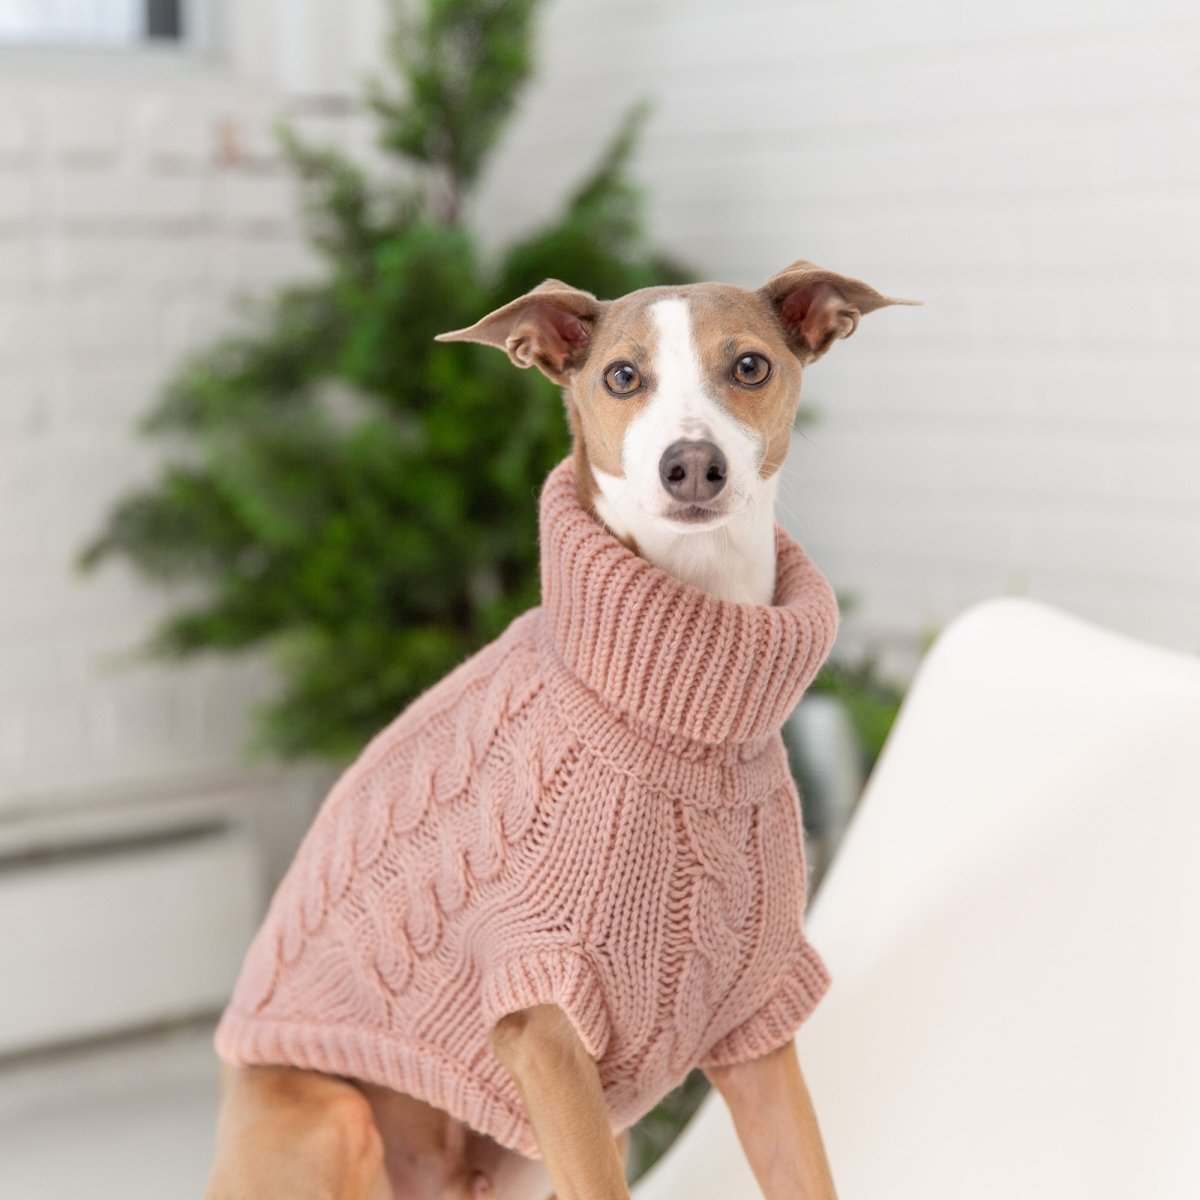 Snuggly Chalet Pet Sweater - Funny Nikko